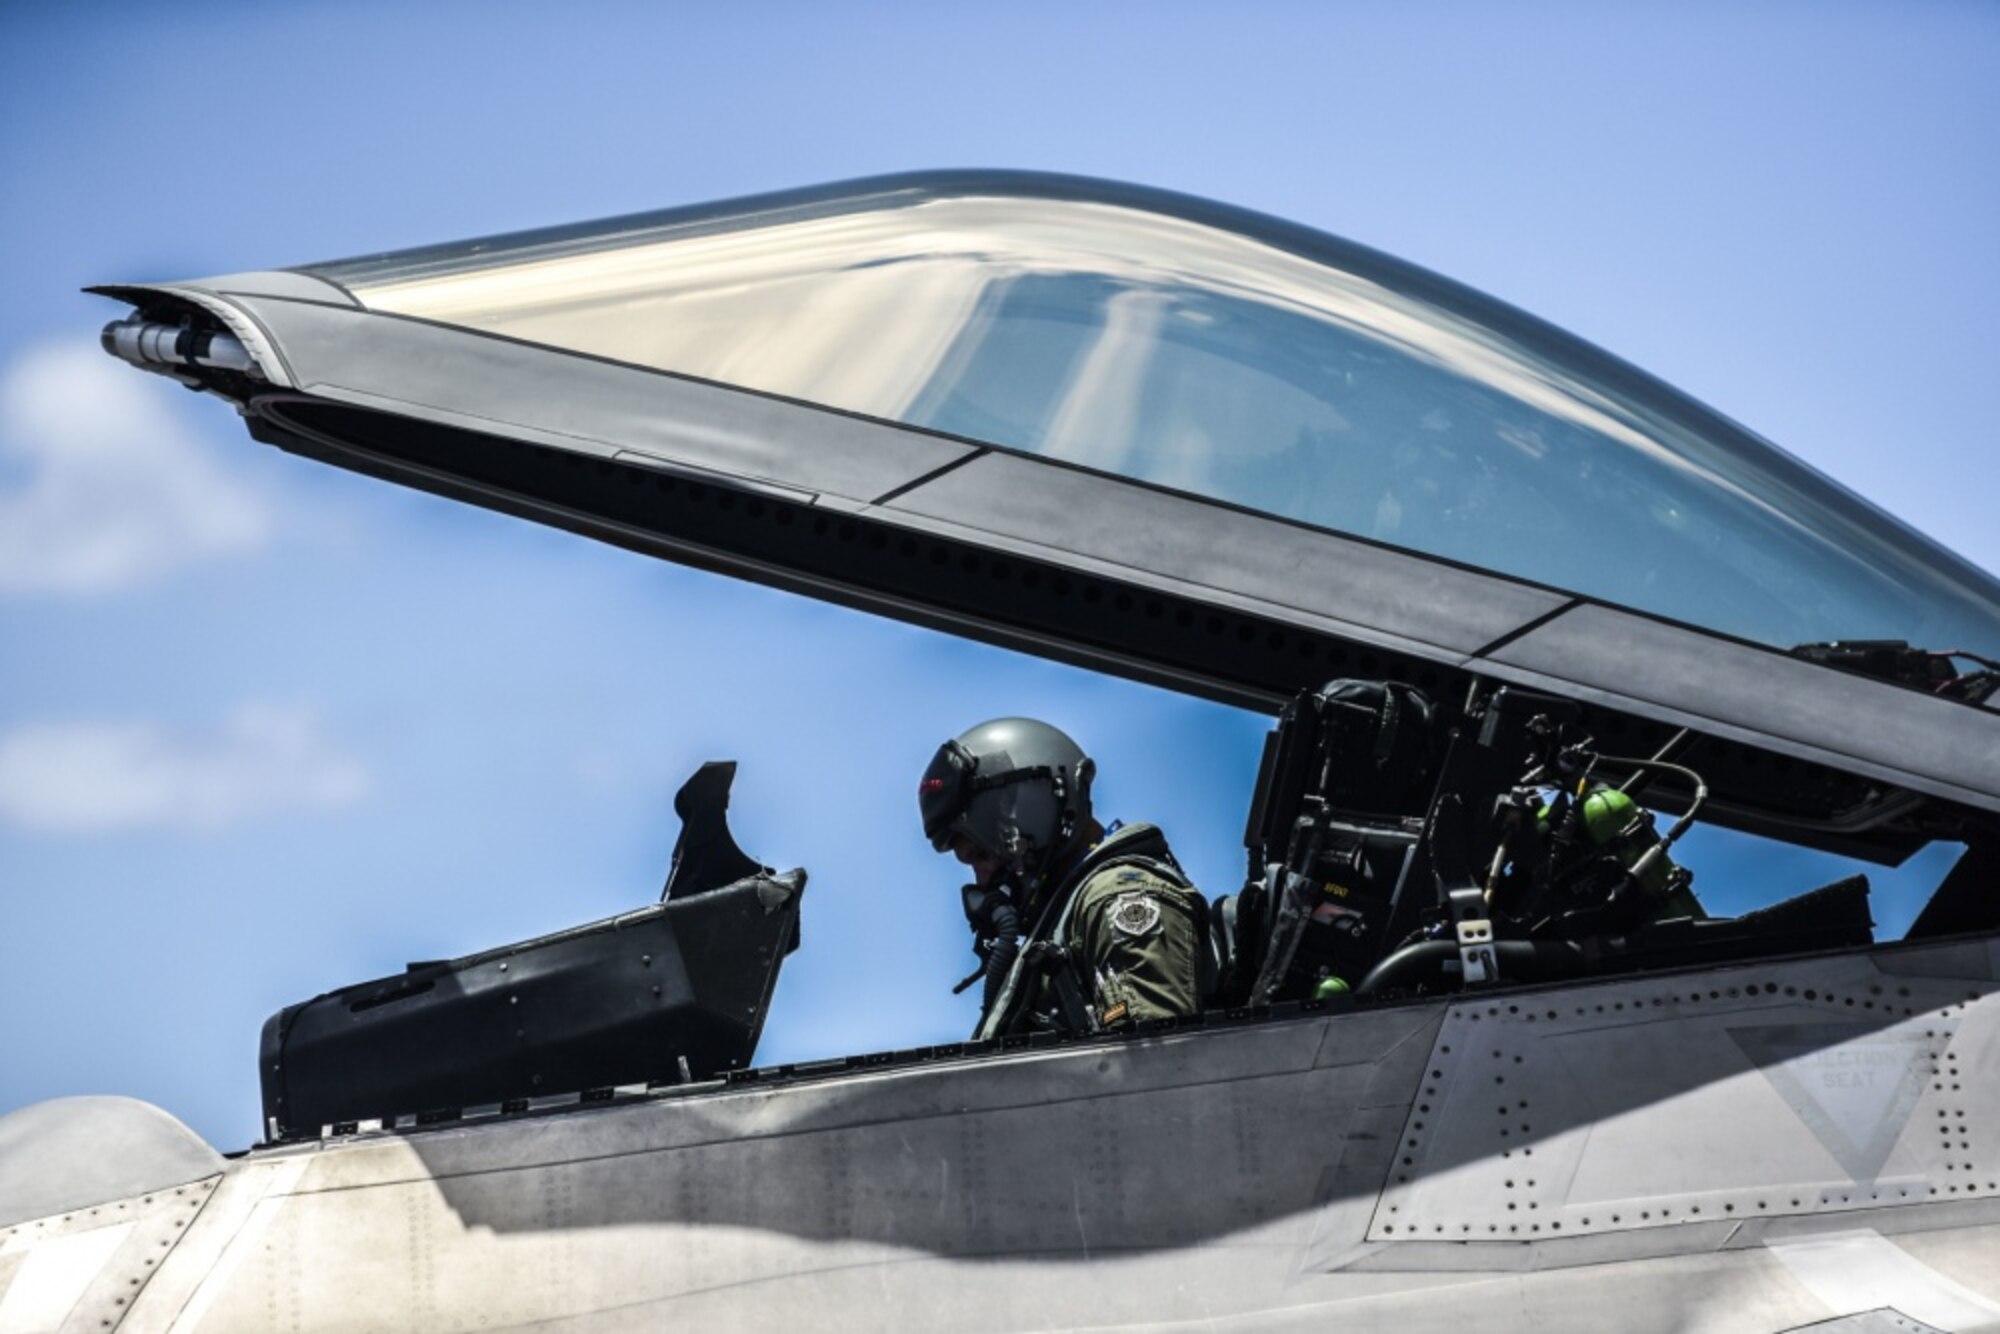 Col. Geoffrey E. Lohmiller, 15th Wing vice commander, exits an F-22 Hawaiian Raptors for the last time during his fini flight at Joint Base Pearl Harbor-Hickam, Hawaii, June 26, 2020. Lohmiller, who served as the vice wing commander since May 2018, will retire later this year. (U.S. Air Force photo by Tech. Sgt. Anthony Nelson Jr.)